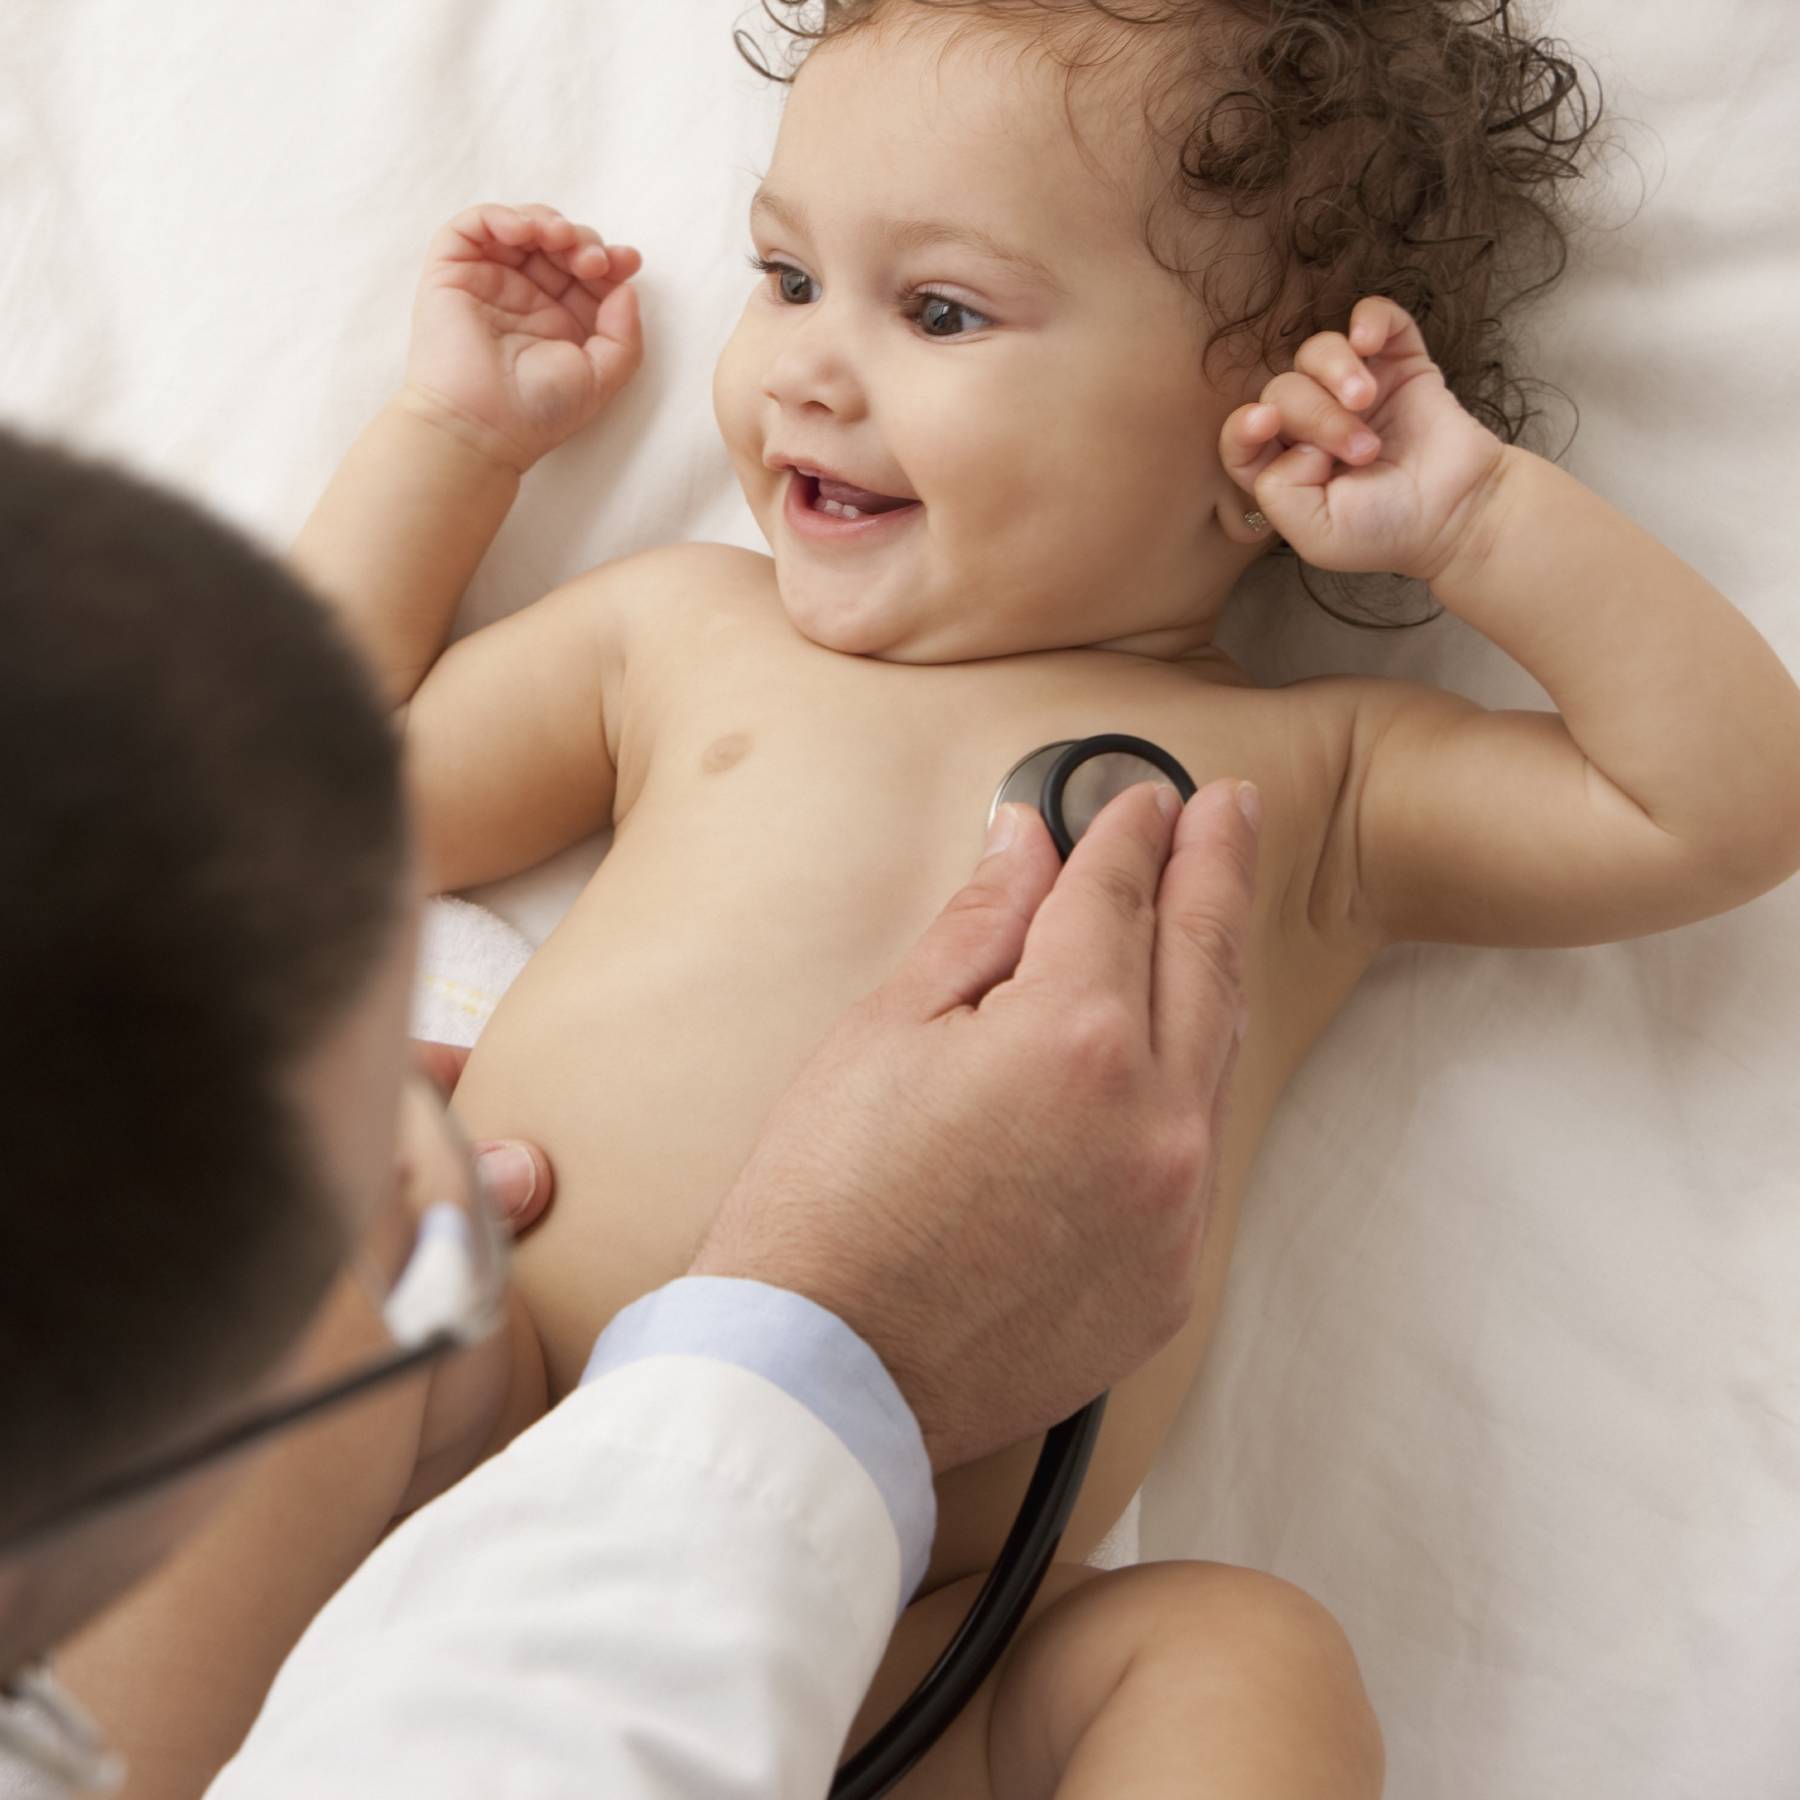 Healthcare provider using stethescope to listen to infant's heart beat